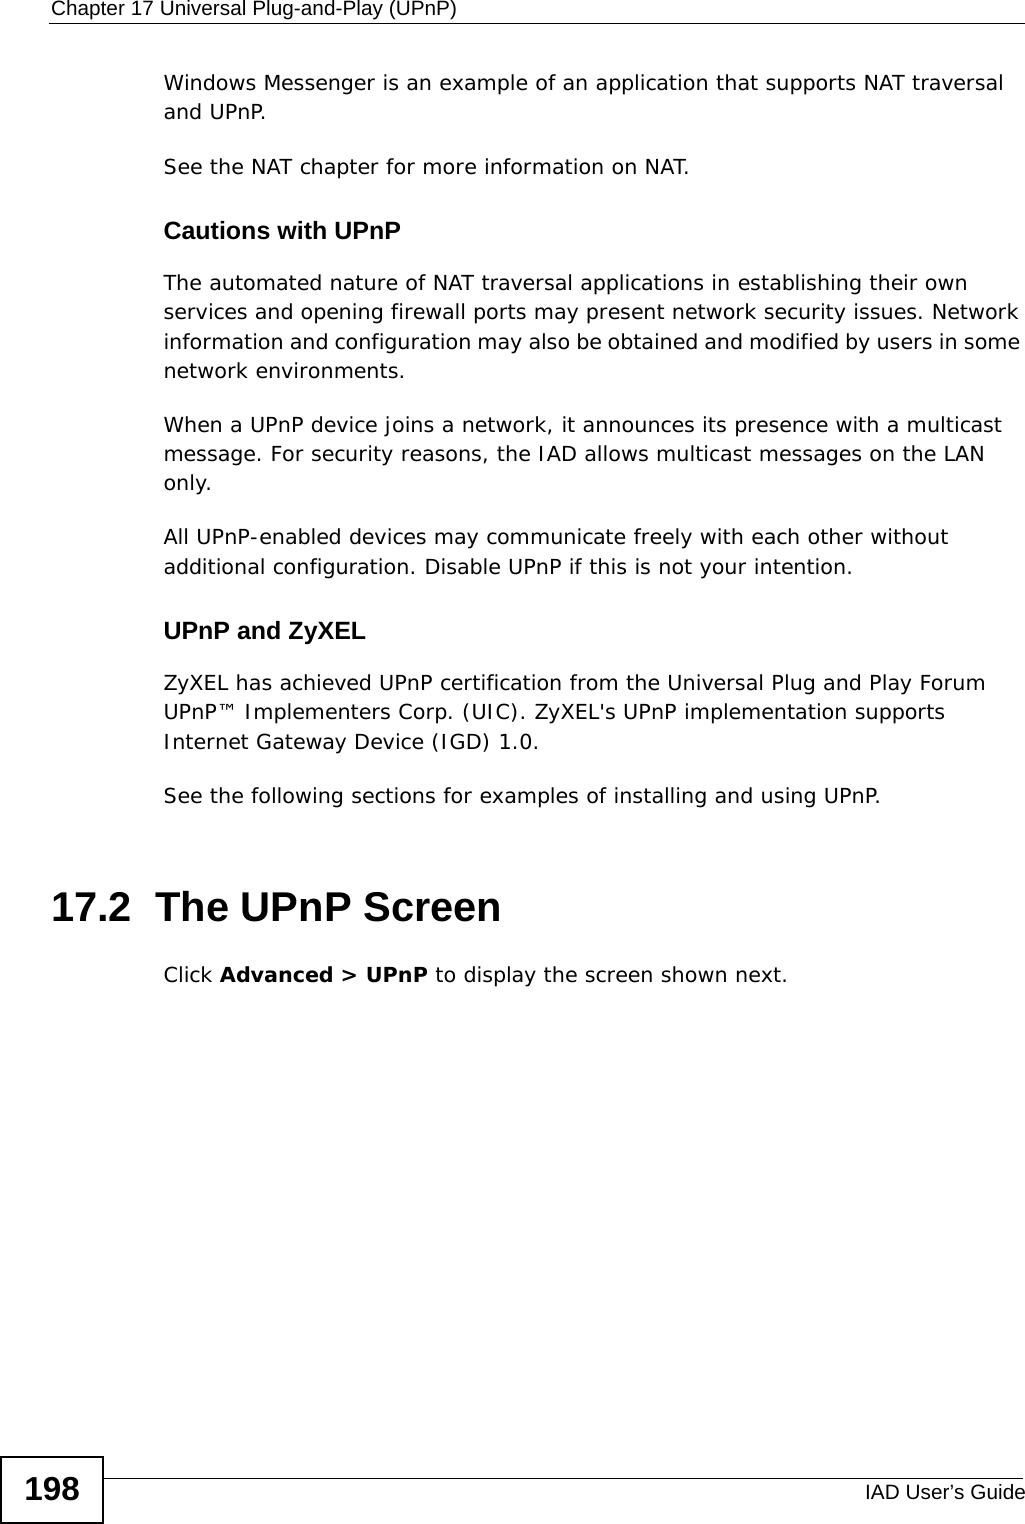 Chapter 17 Universal Plug-and-Play (UPnP)IAD User’s Guide198Windows Messenger is an example of an application that supports NAT traversal and UPnP. See the NAT chapter for more information on NAT.Cautions with UPnPThe automated nature of NAT traversal applications in establishing their own services and opening firewall ports may present network security issues. Network information and configuration may also be obtained and modified by users in some network environments. When a UPnP device joins a network, it announces its presence with a multicast message. For security reasons, the IAD allows multicast messages on the LAN only.All UPnP-enabled devices may communicate freely with each other without additional configuration. Disable UPnP if this is not your intention. UPnP and ZyXELZyXEL has achieved UPnP certification from the Universal Plug and Play Forum UPnP™ Implementers Corp. (UIC). ZyXEL&apos;s UPnP implementation supports Internet Gateway Device (IGD) 1.0. See the following sections for examples of installing and using UPnP.17.2  The UPnP ScreenClick Advanced &gt; UPnP to display the screen shown next.